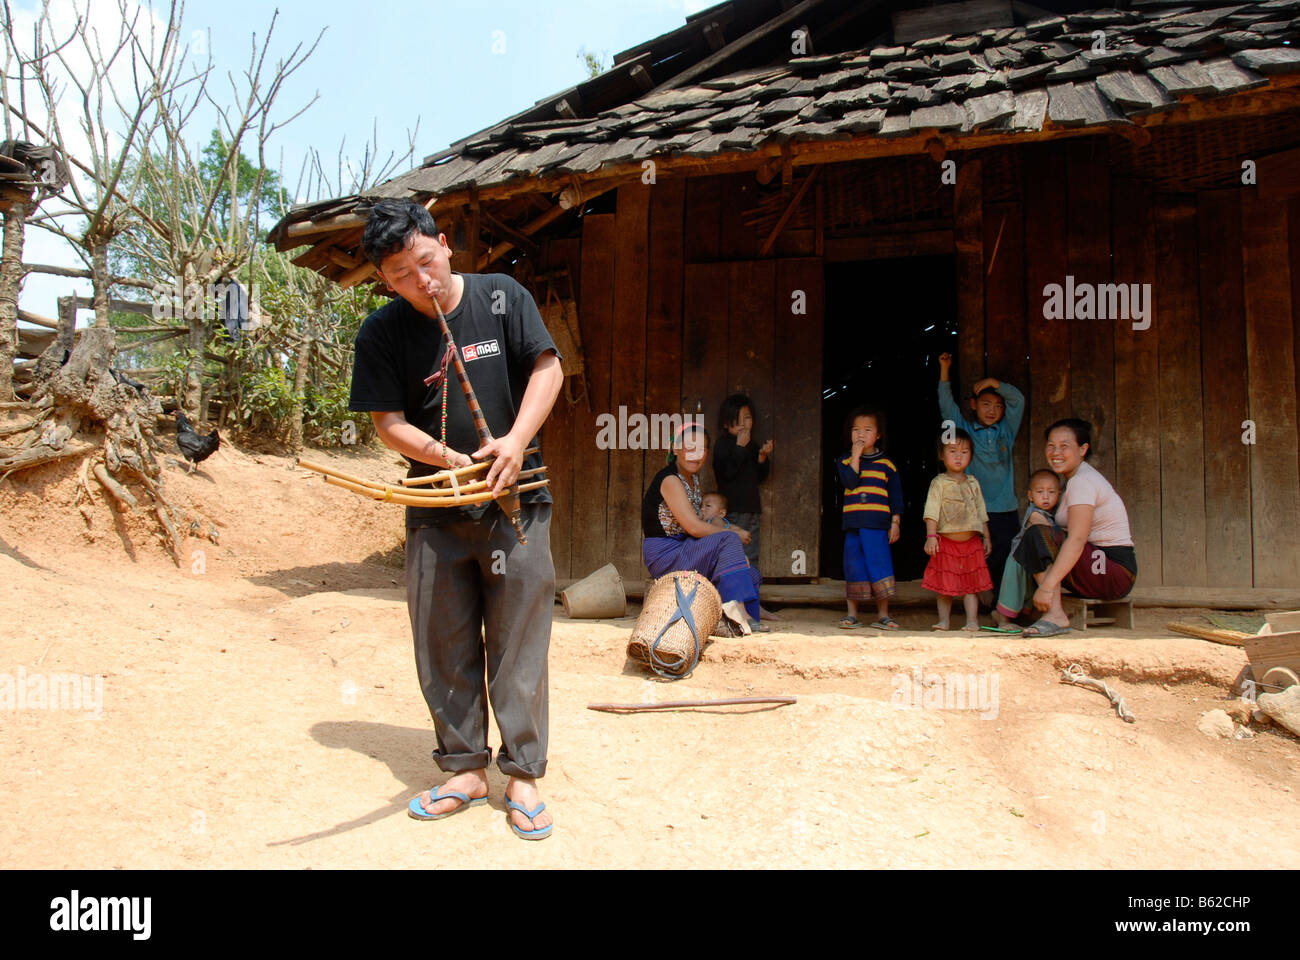 Hmong musician playing the flut in the village, a traditional instrument, Phakeo, Xieng Khuang Province, Laos, Southeast Asia Stock Photo